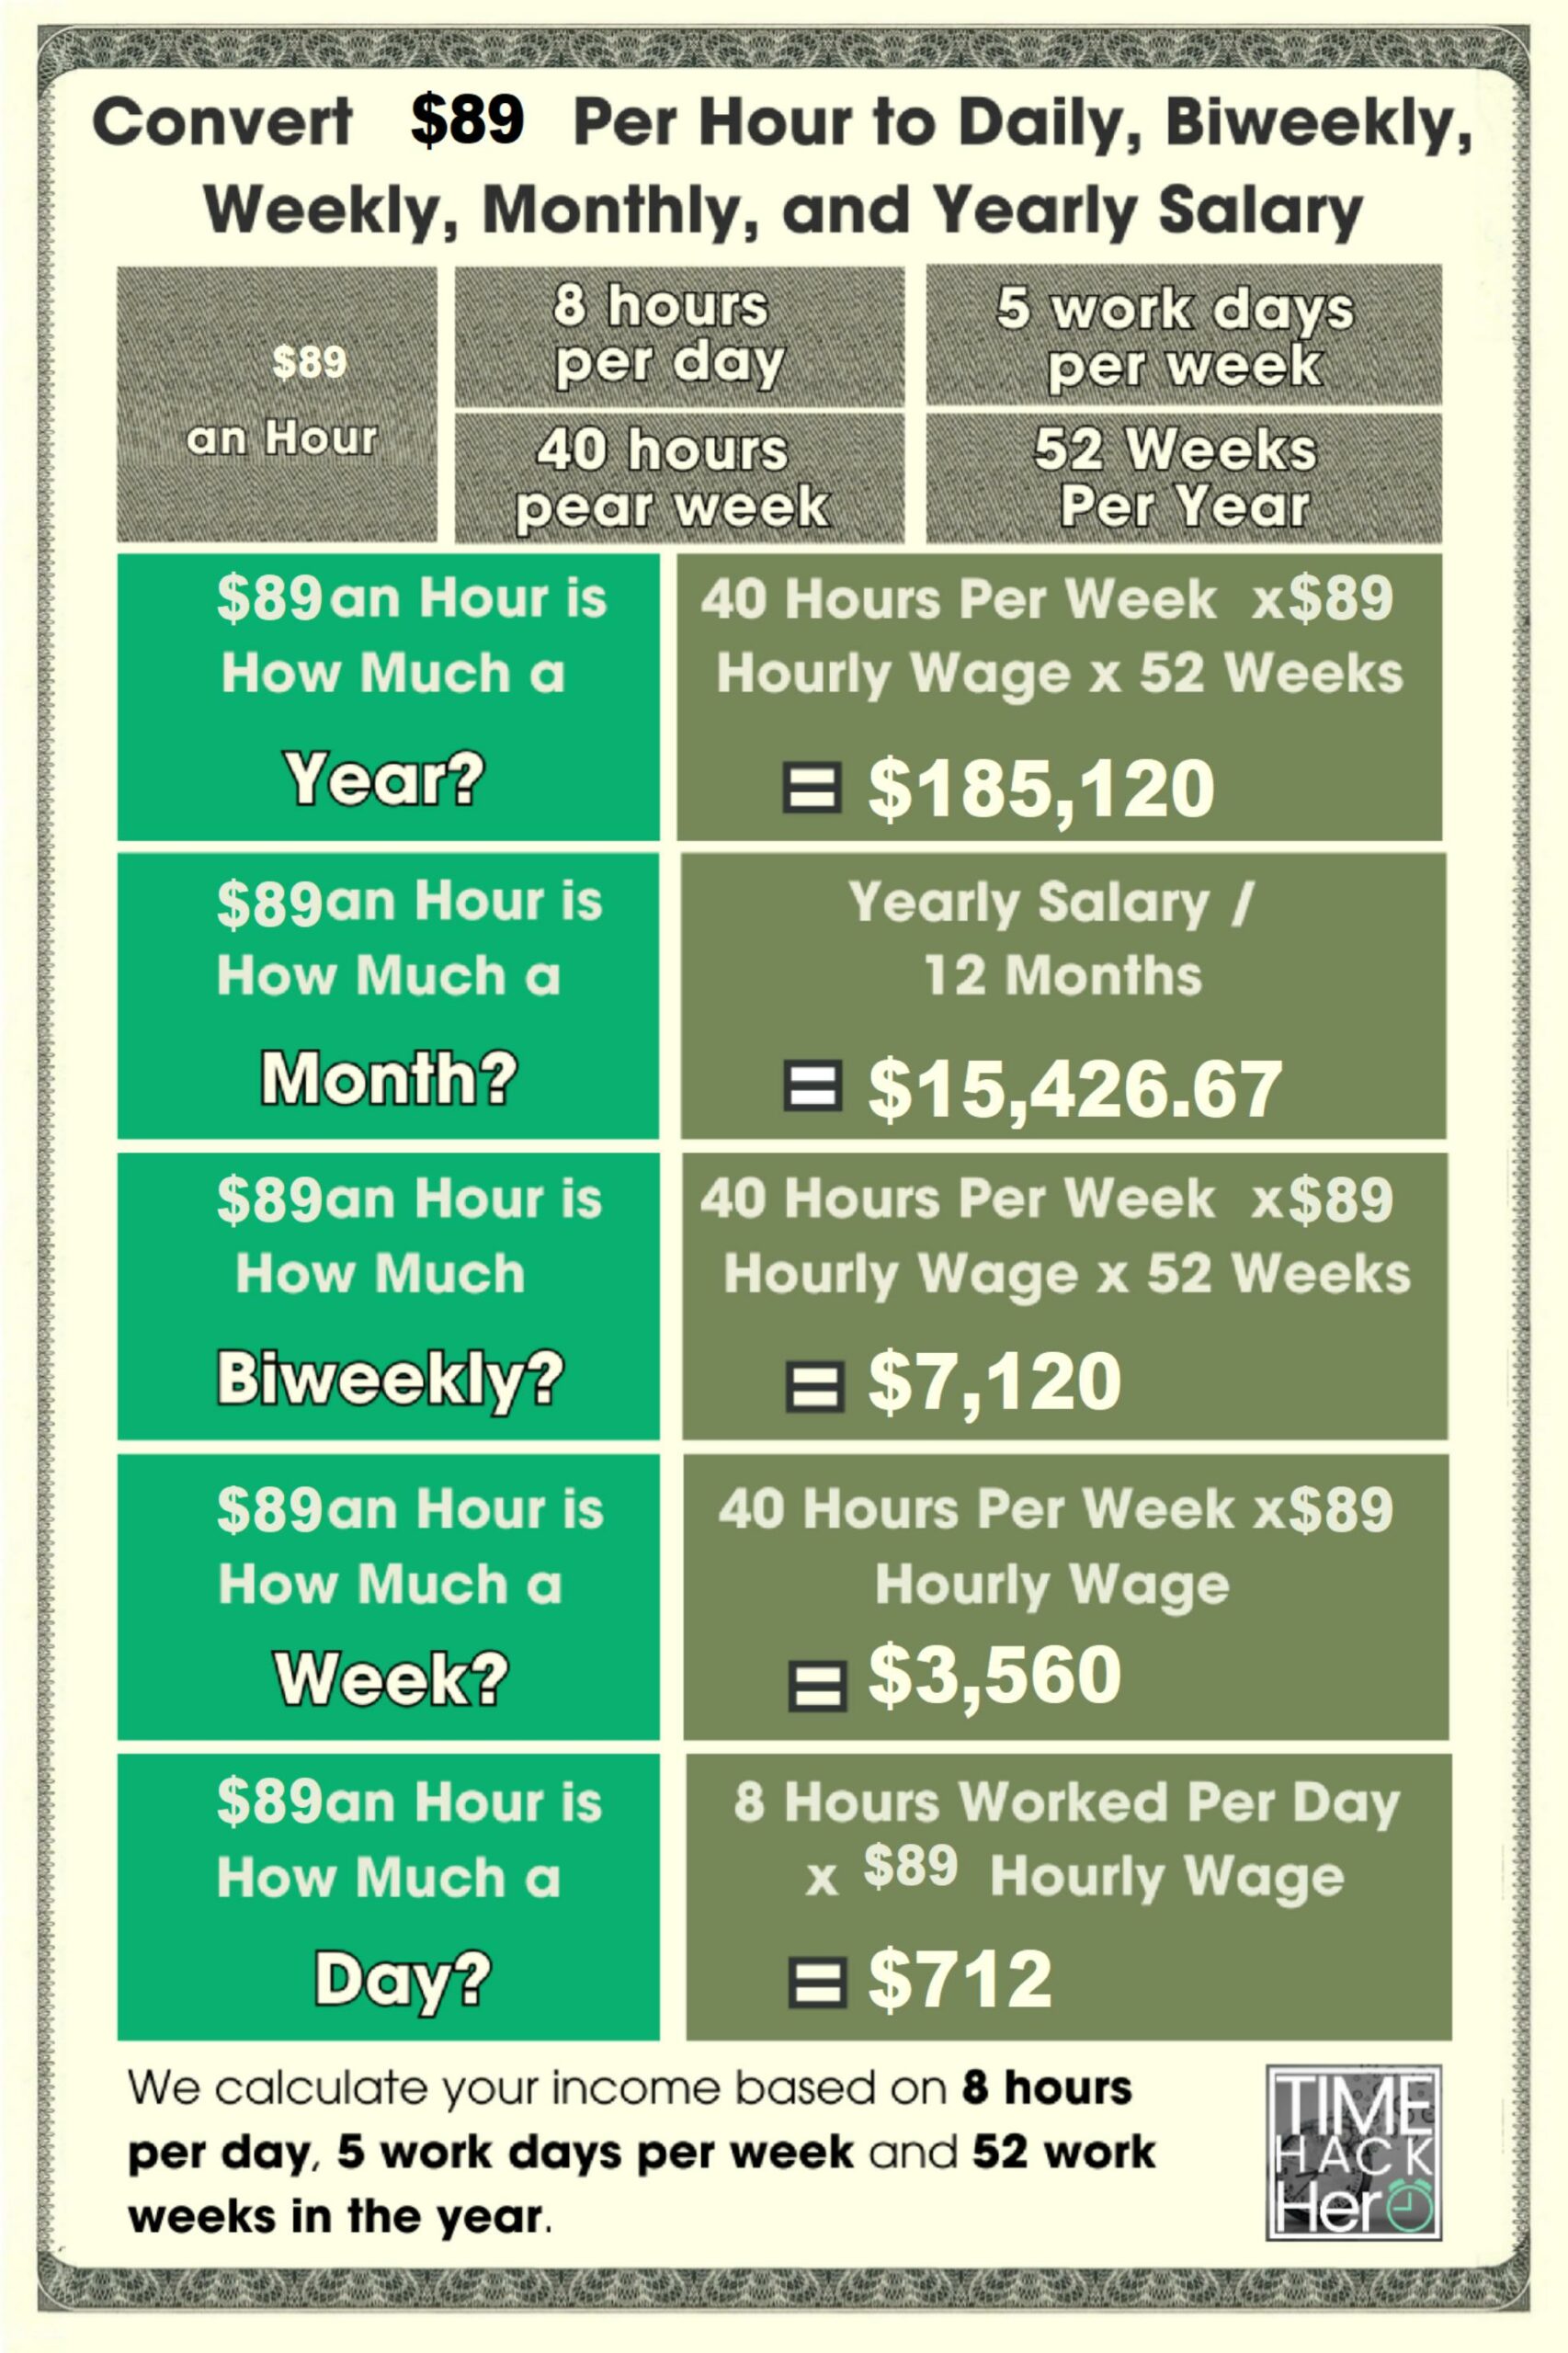 Convert $89 Per Hour to Weekly, Monthly, and Yearly Salary